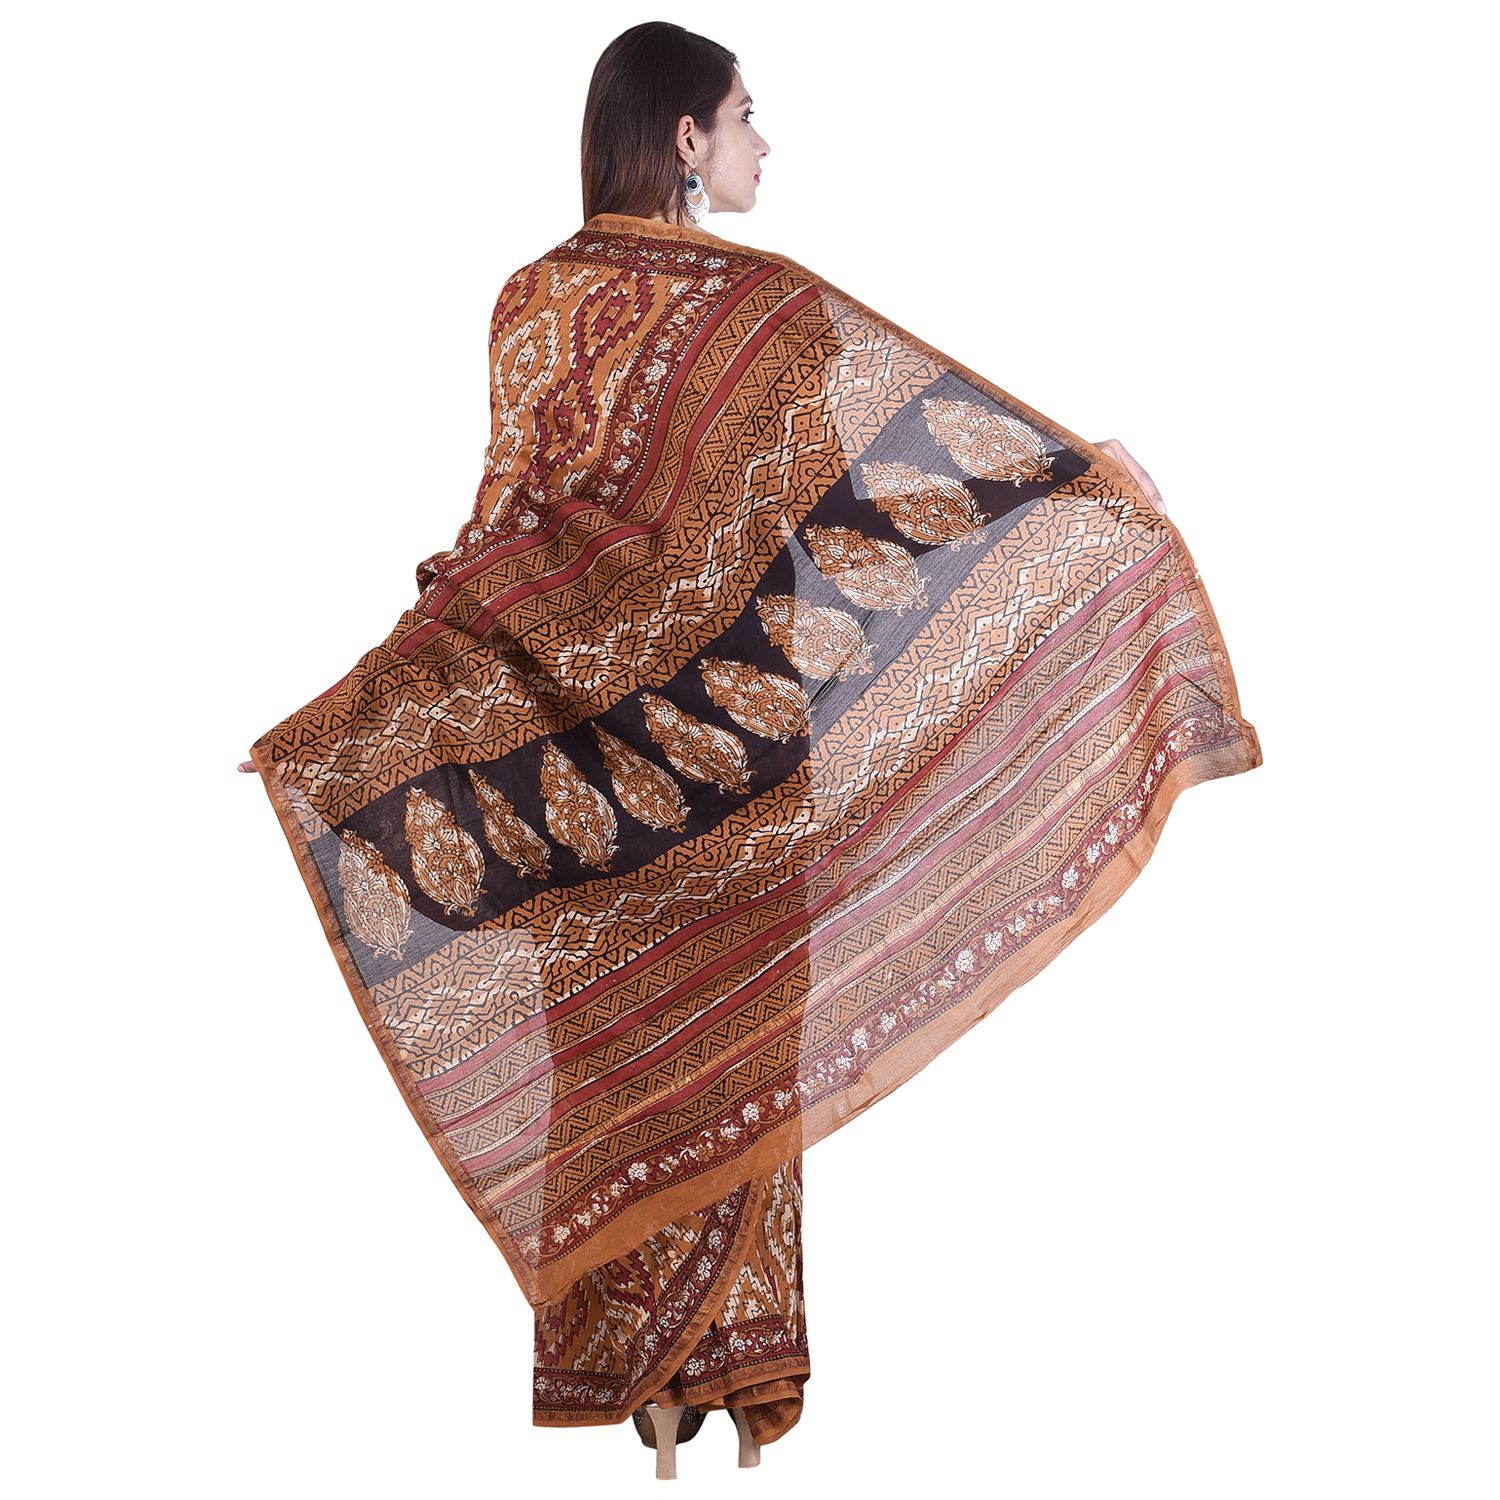 Cotton India Brown and Beige Chanderi Saree - Buy Cotton India Brown ...